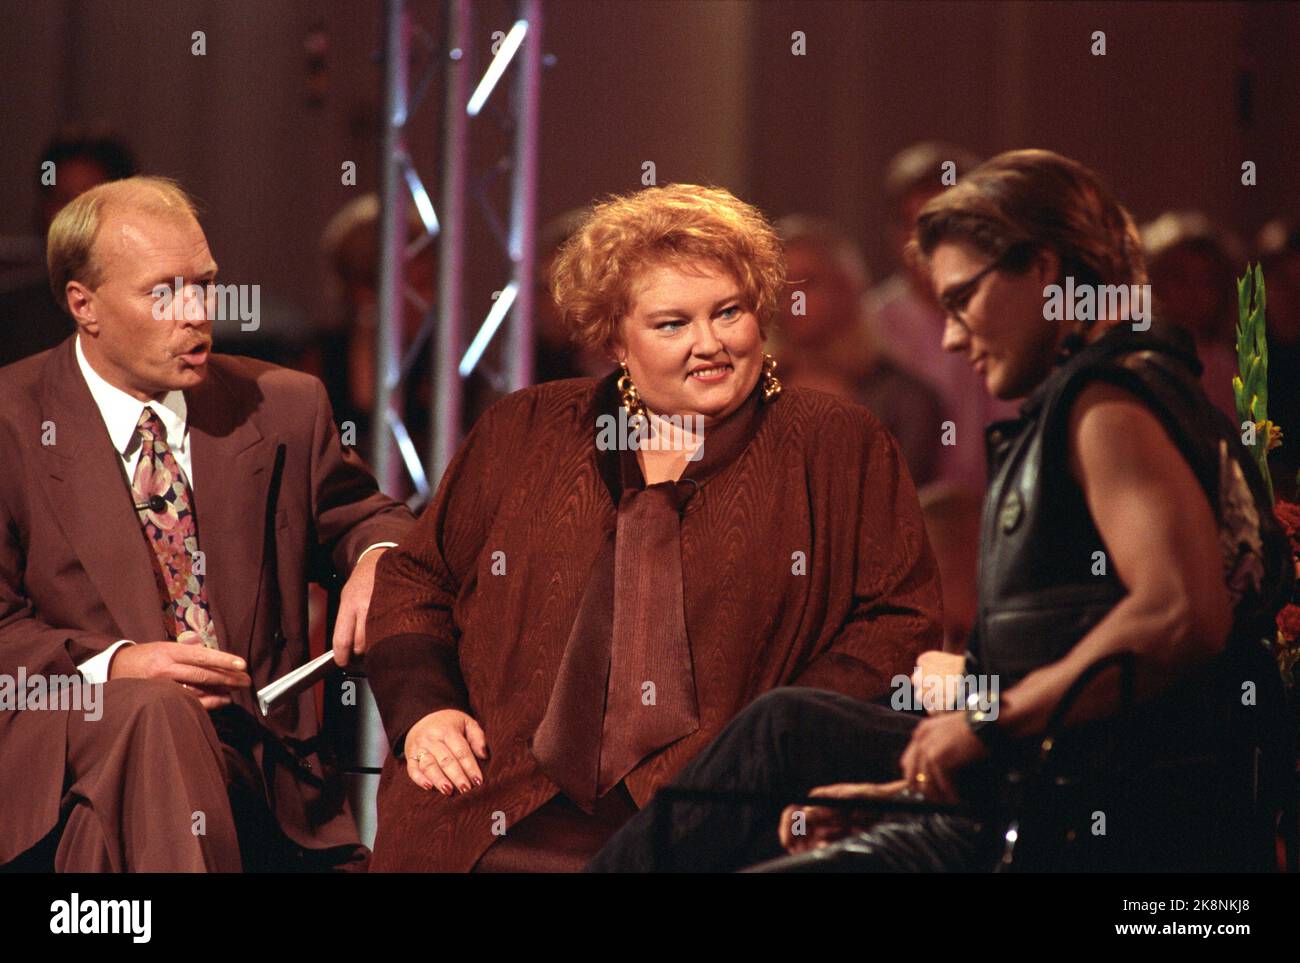 Oslo 19911012 'For the Gallery' at NRK The program leaders from v. Per Ståle Lønning and Marit Christensen together with vocalist Morten Harket from A-ha. Photo: Terje Bendiksby / NTB Stock Photo